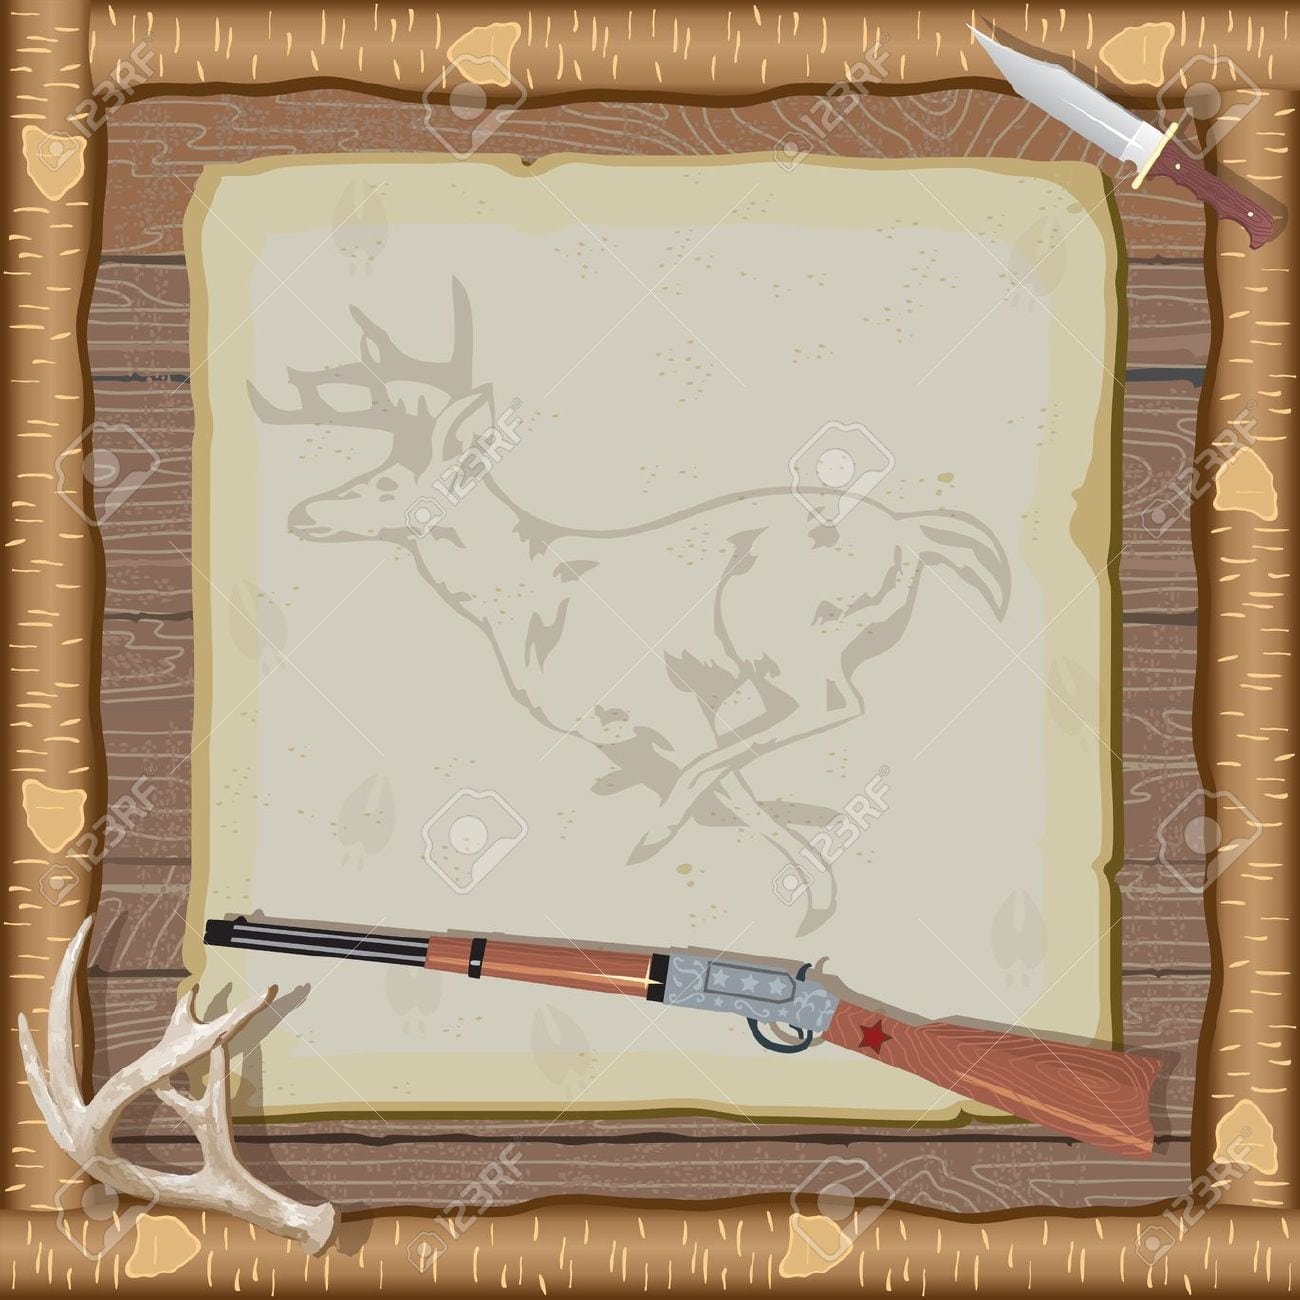 Rustic Hunting Party Invitation With Rifle, Hunting Knife, Deer